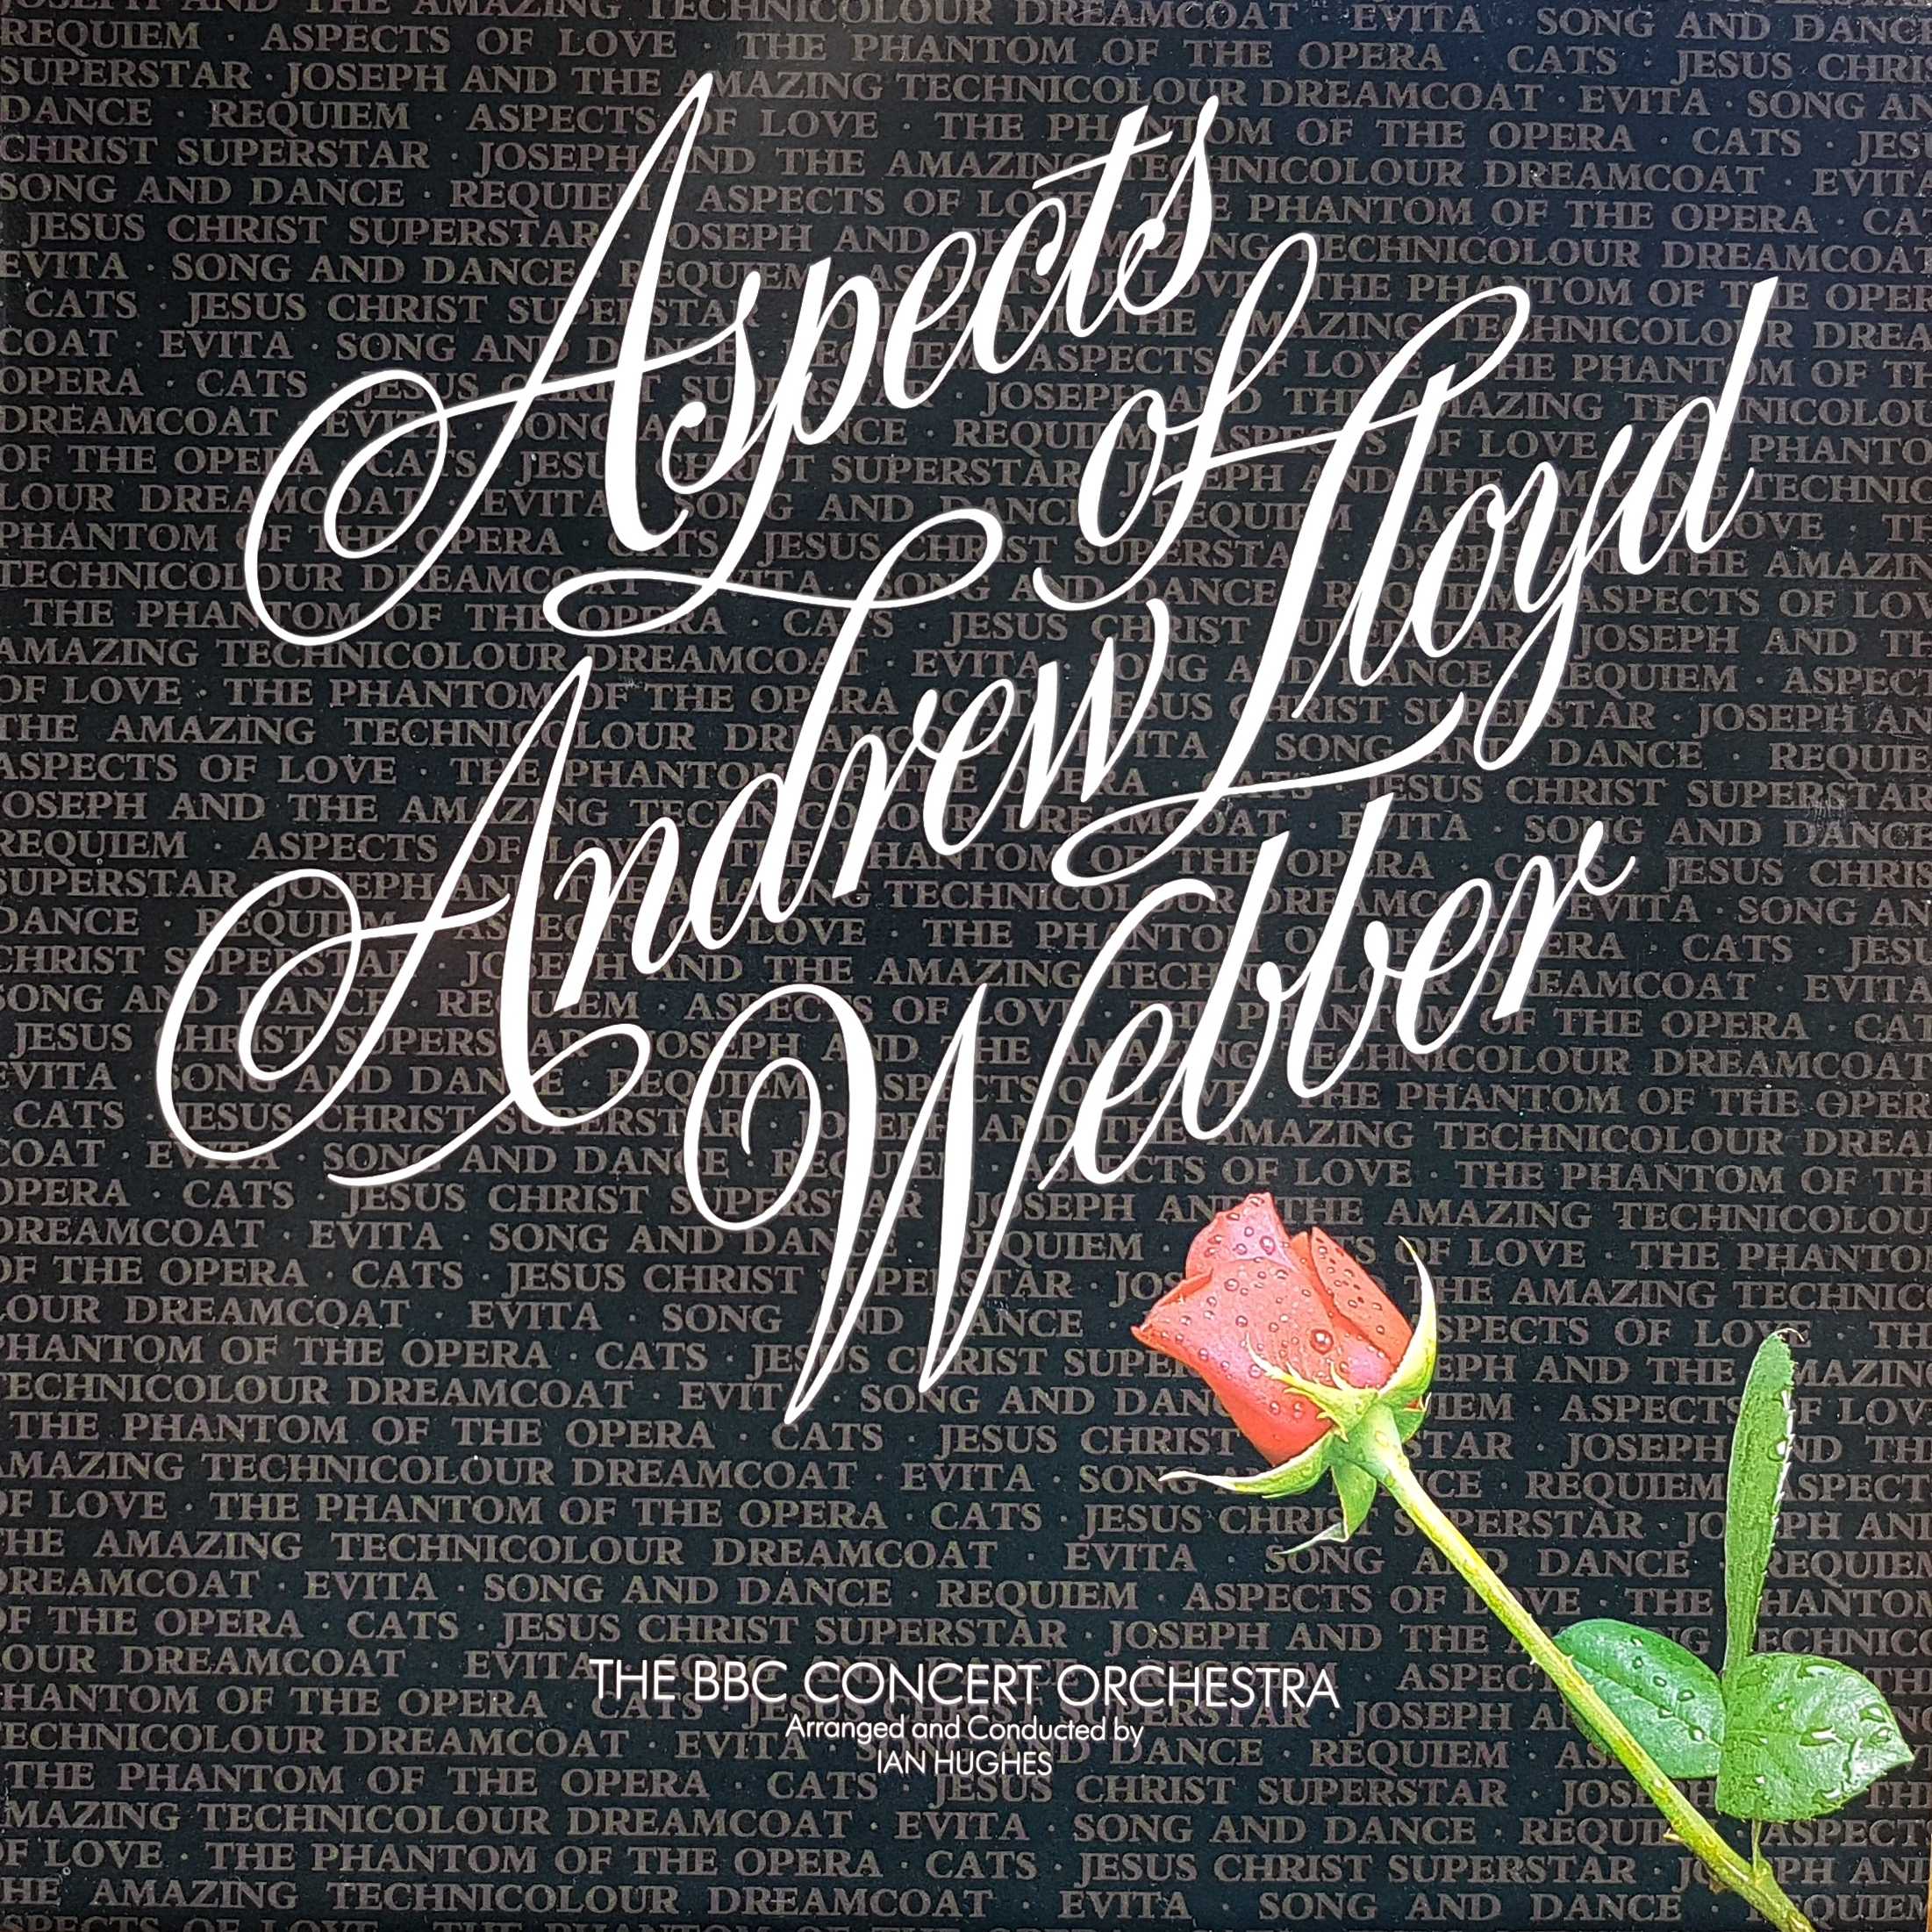 Picture of REB 750 Aspects of Lloyd Webber by artist Andrew Lloyd Webber from the BBC albums - Records and Tapes library